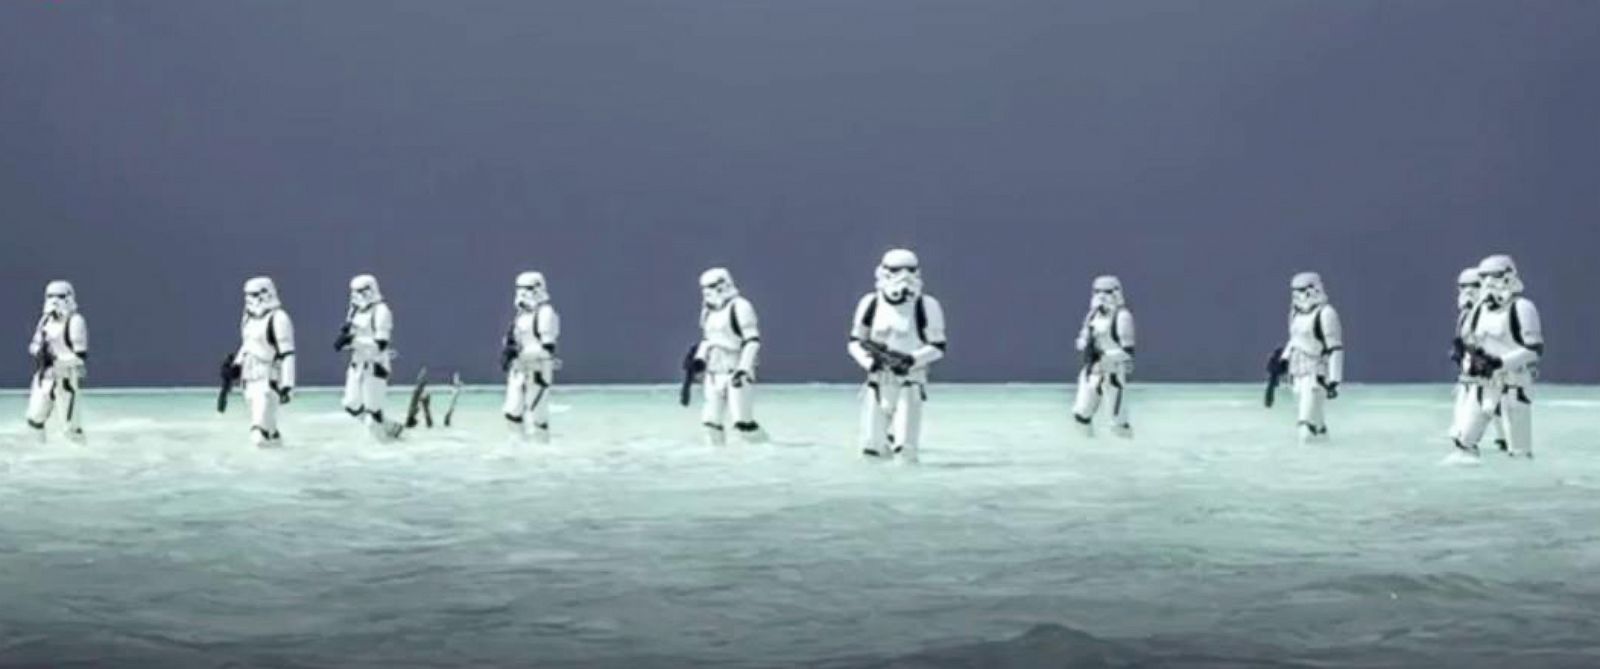 Online Rogue One: A Star Wars Story Movie 2016